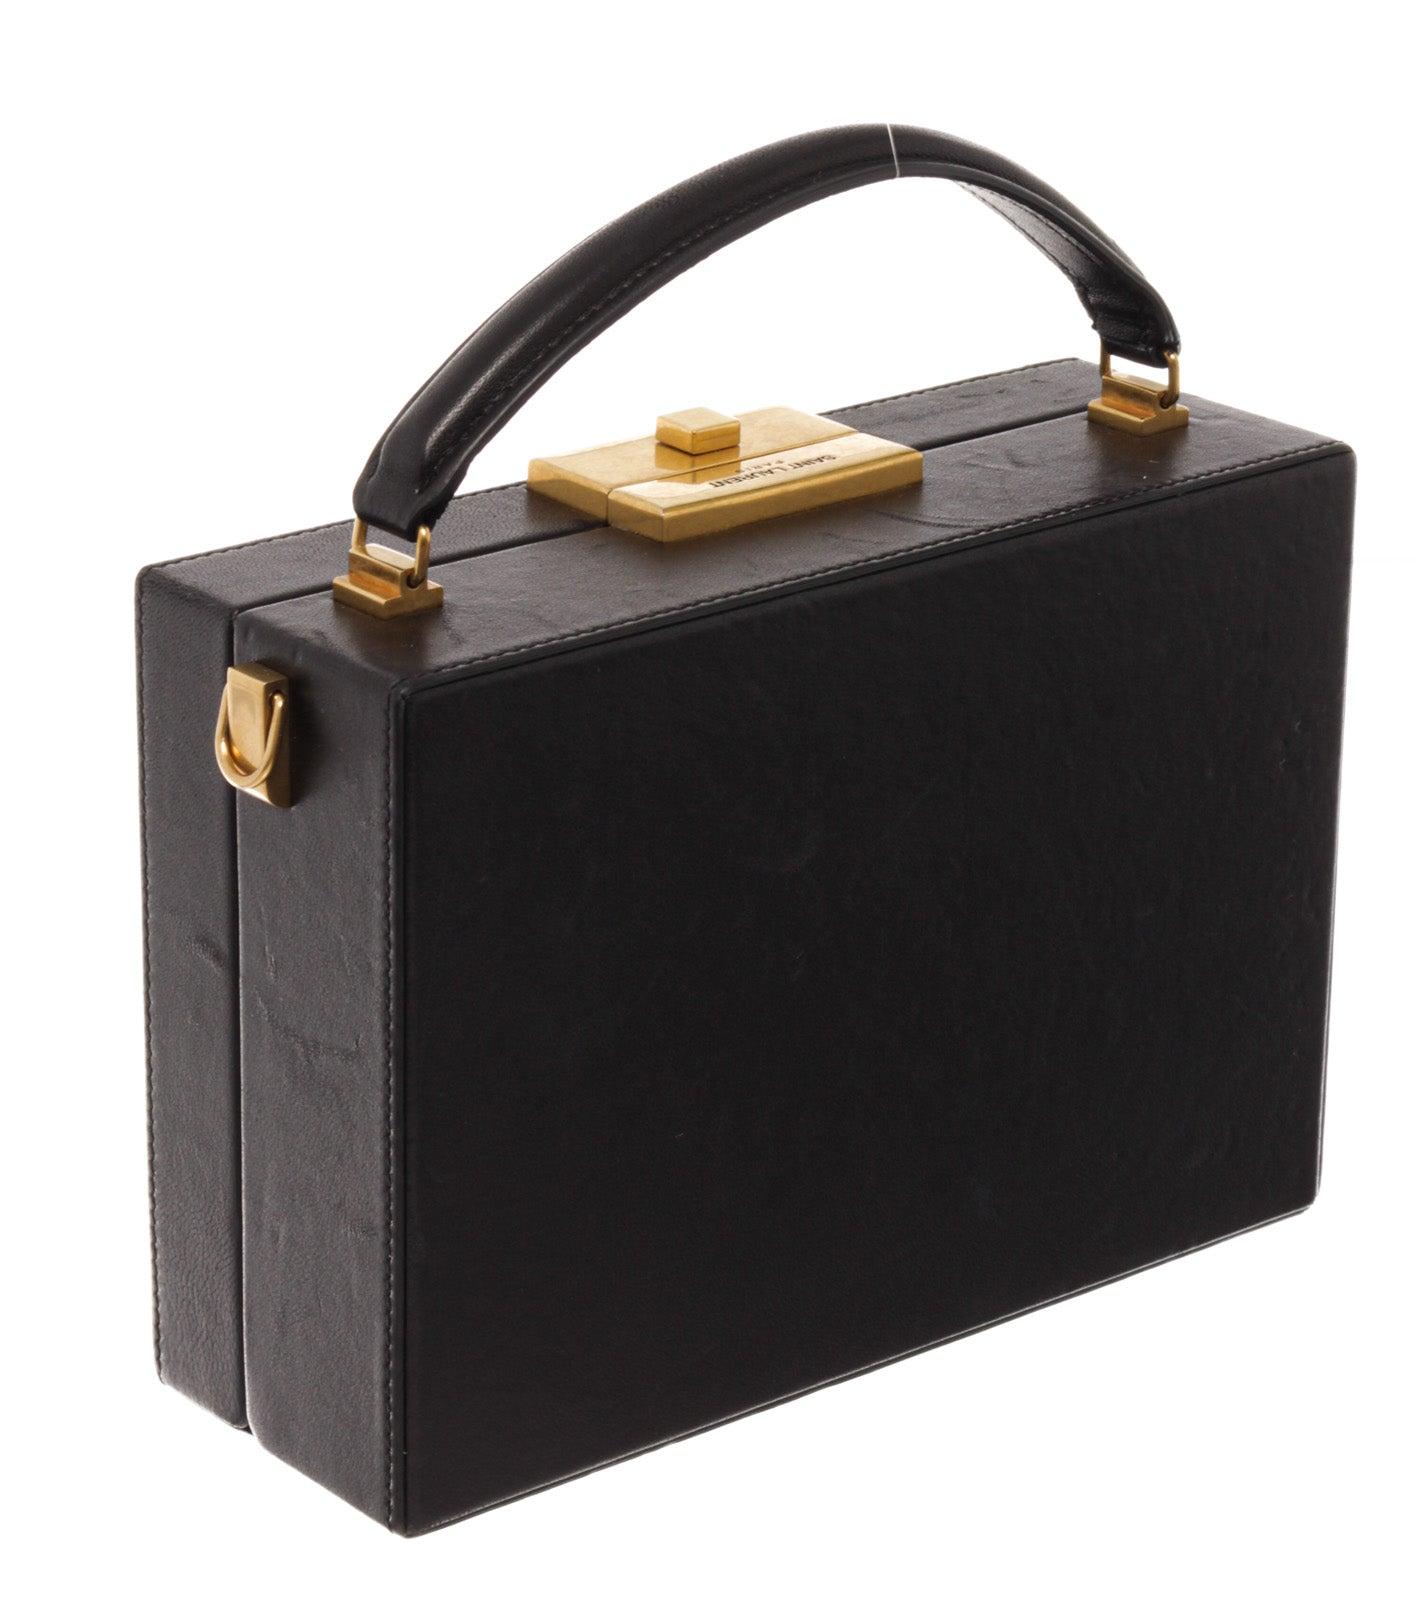 Saint Lauren YSL Black Lather Nan Box Bag is a box-shaped shoulder bag,top comes with a flexible leather handle for hand carry with gold-tone hardware,there is also a main compartment including 1 card slot inside. and the bottom features 4 gold-tone